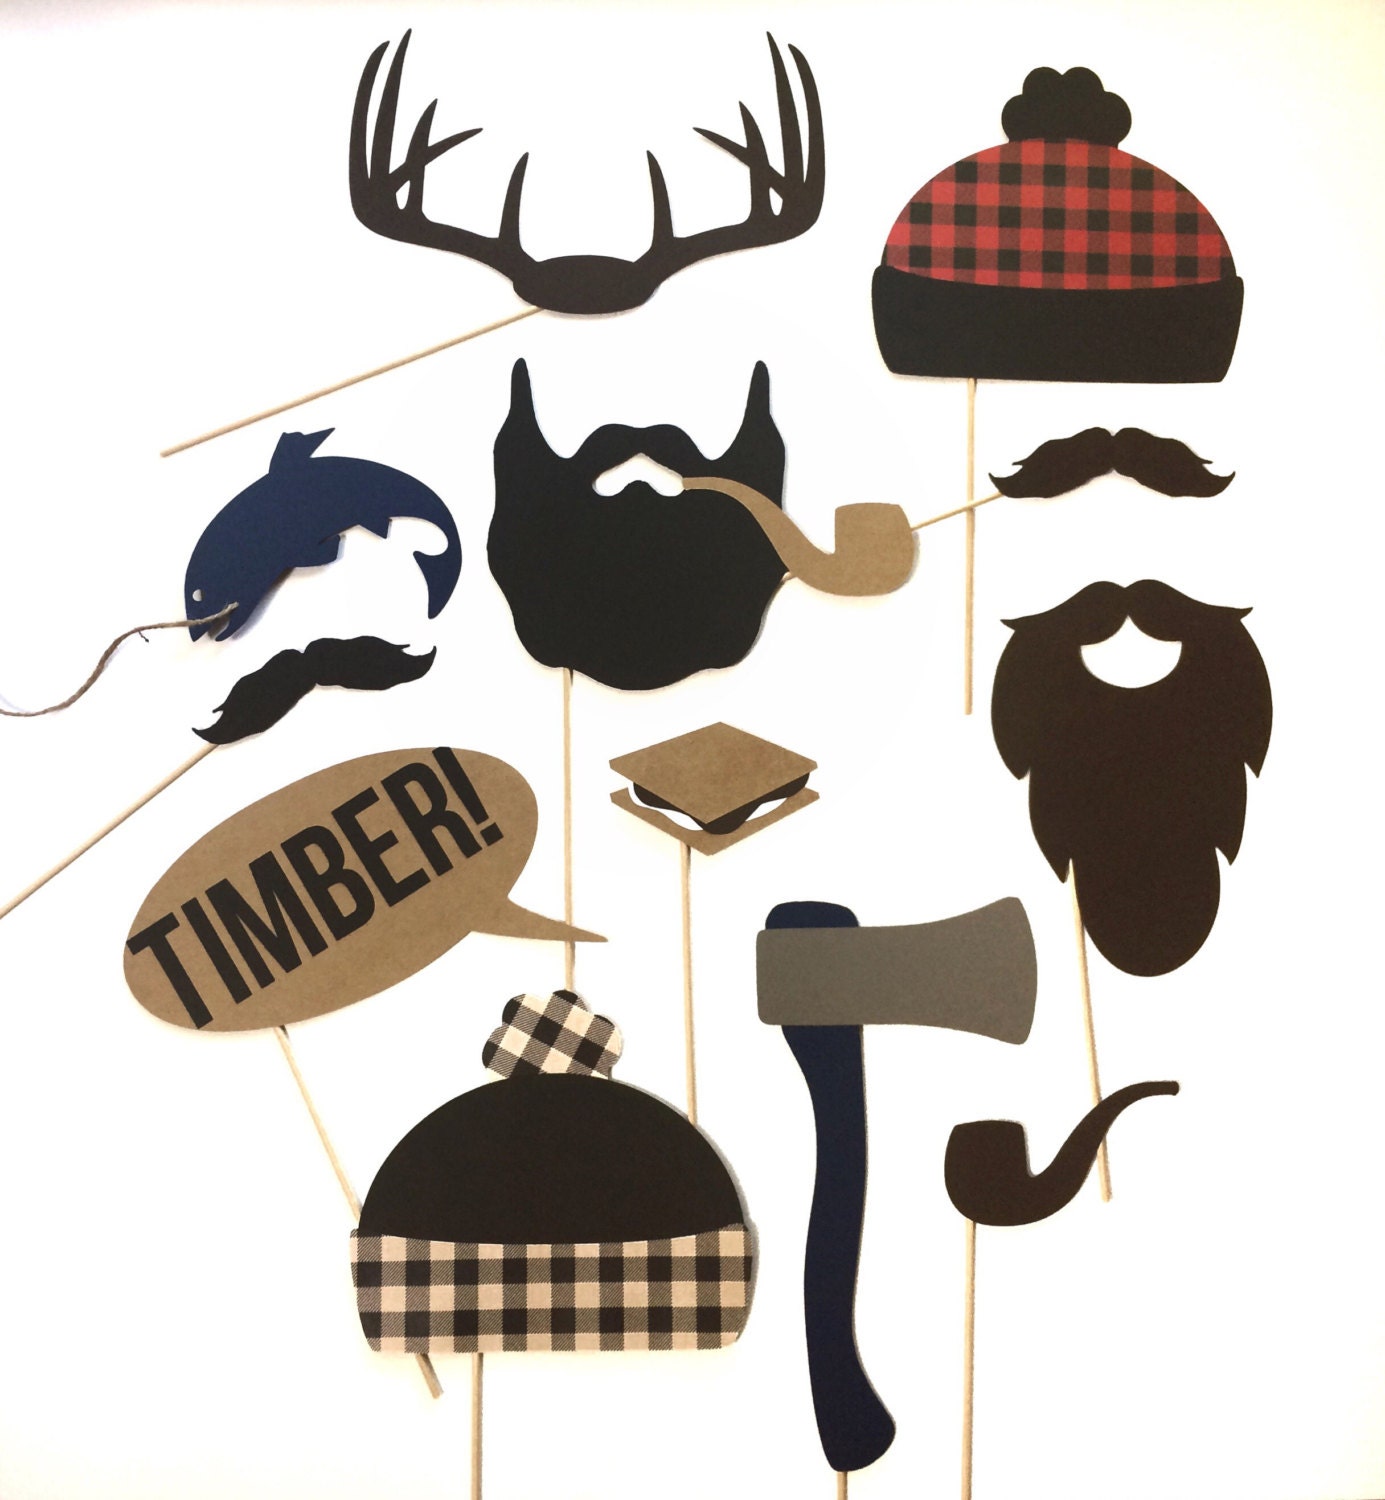 Lumberjack Photo Booth Props 12 pieces